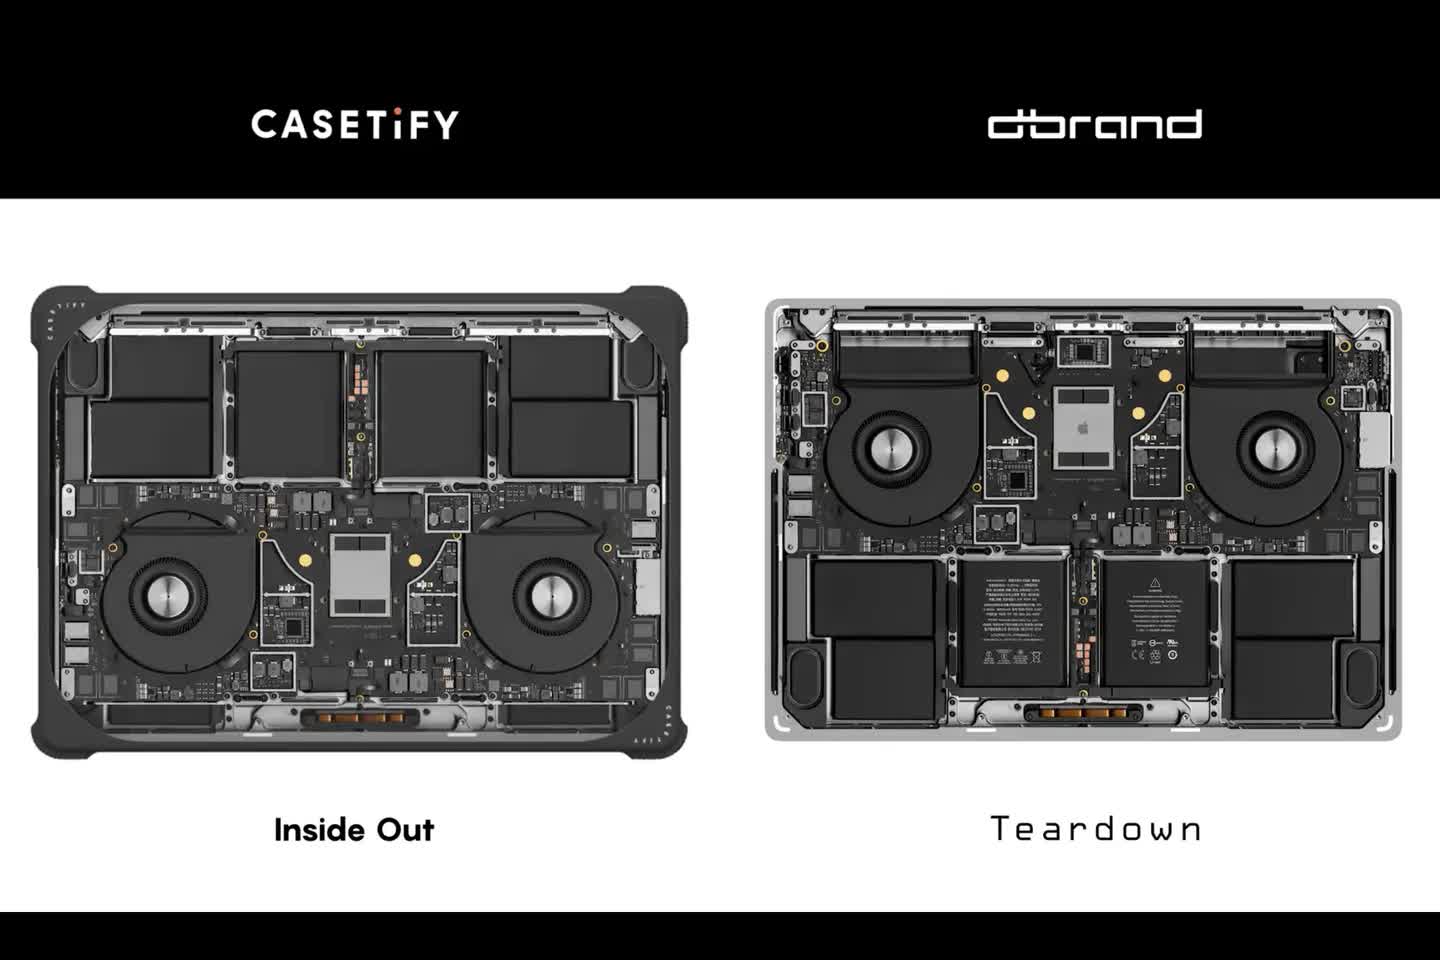 Dbrand takes legal action against Casetify for allegedly stealing its Teardown designs